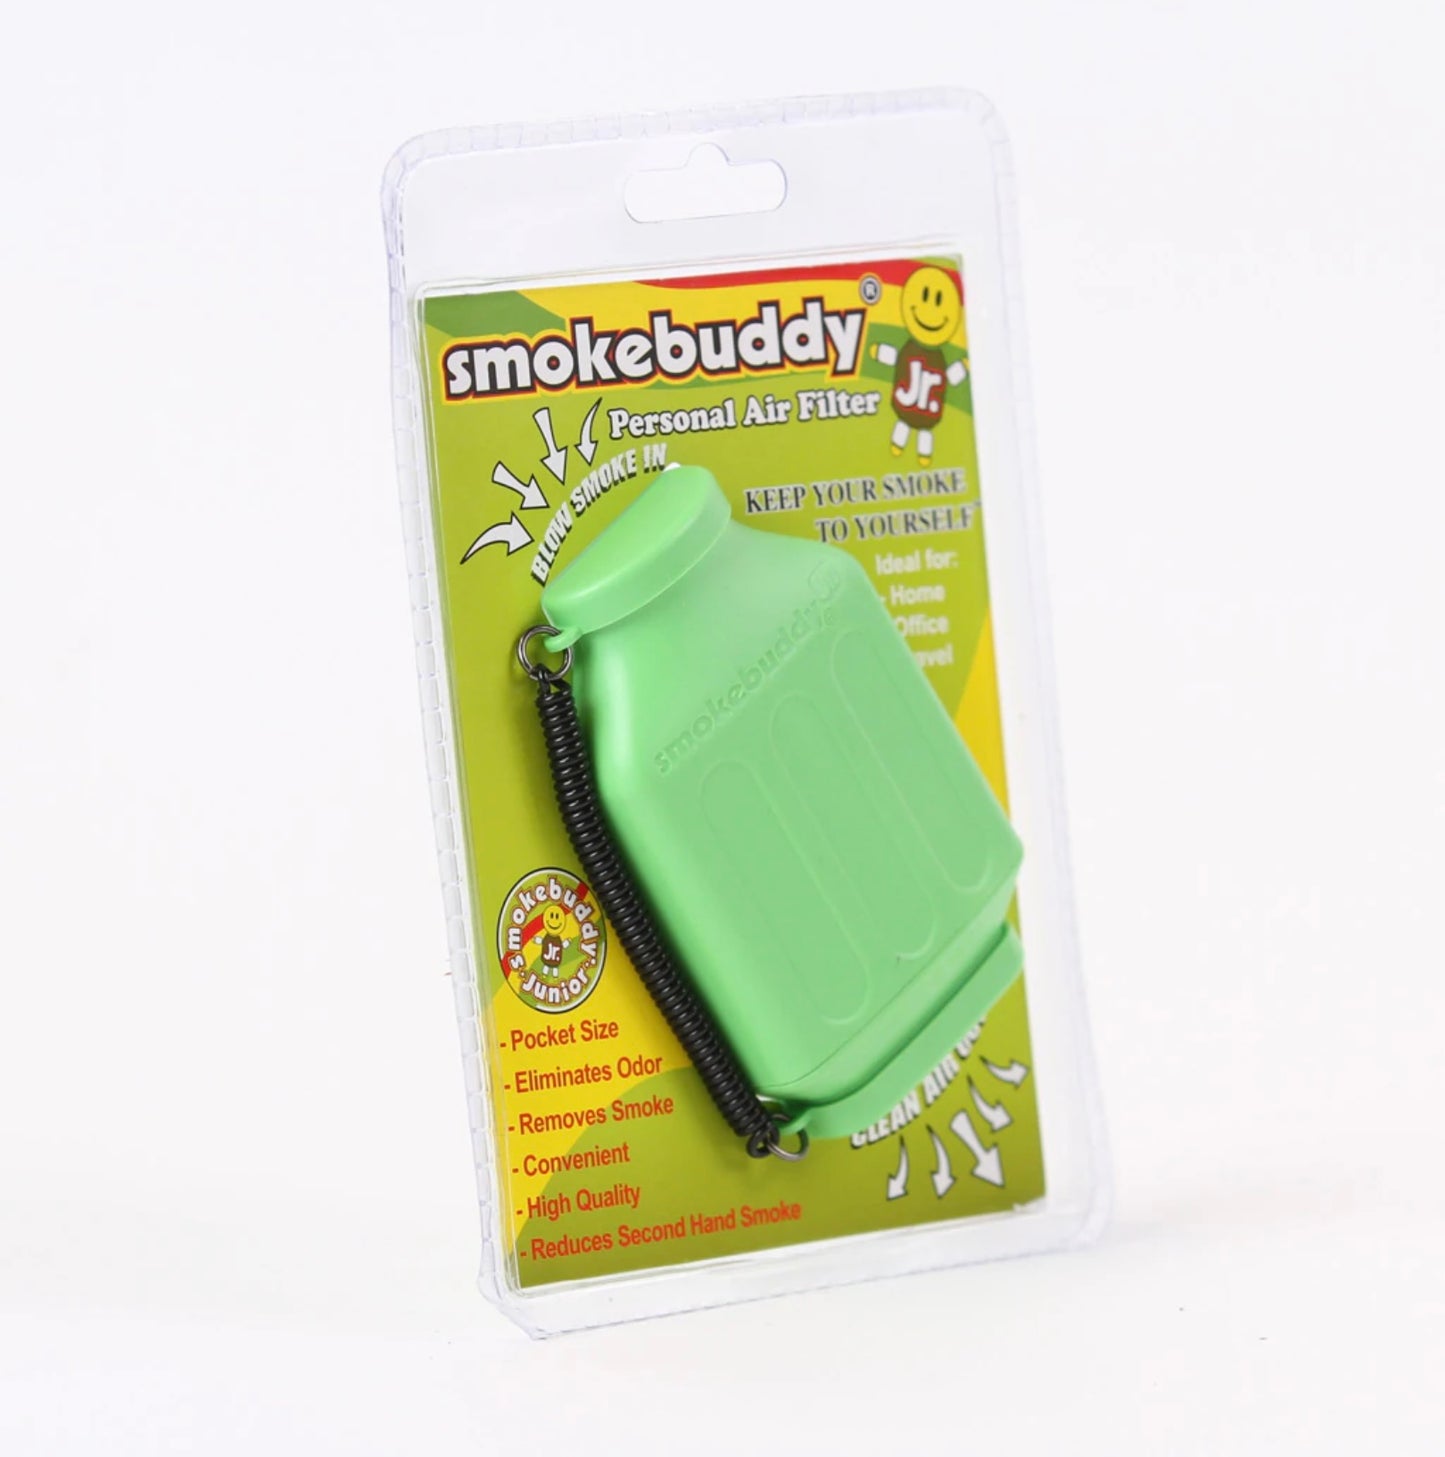 Lime Green Smokebuddy Junior Personal Air Filter yoga smokes yoga studio, delivery, delivery near me, yoga smokes smoke shop, find smoke shop, head shop near me, yoga studio, headshop, head shop, local smoke shop, psl, psl smoke shop, smoke shop, smokeshop, yoga, yoga studio, dispensary, local dispensary, smokeshop near me, port saint lucie, florida, port st lucie, lounge, life, highlife, love, stoned, highsociety. Yoga Smokes